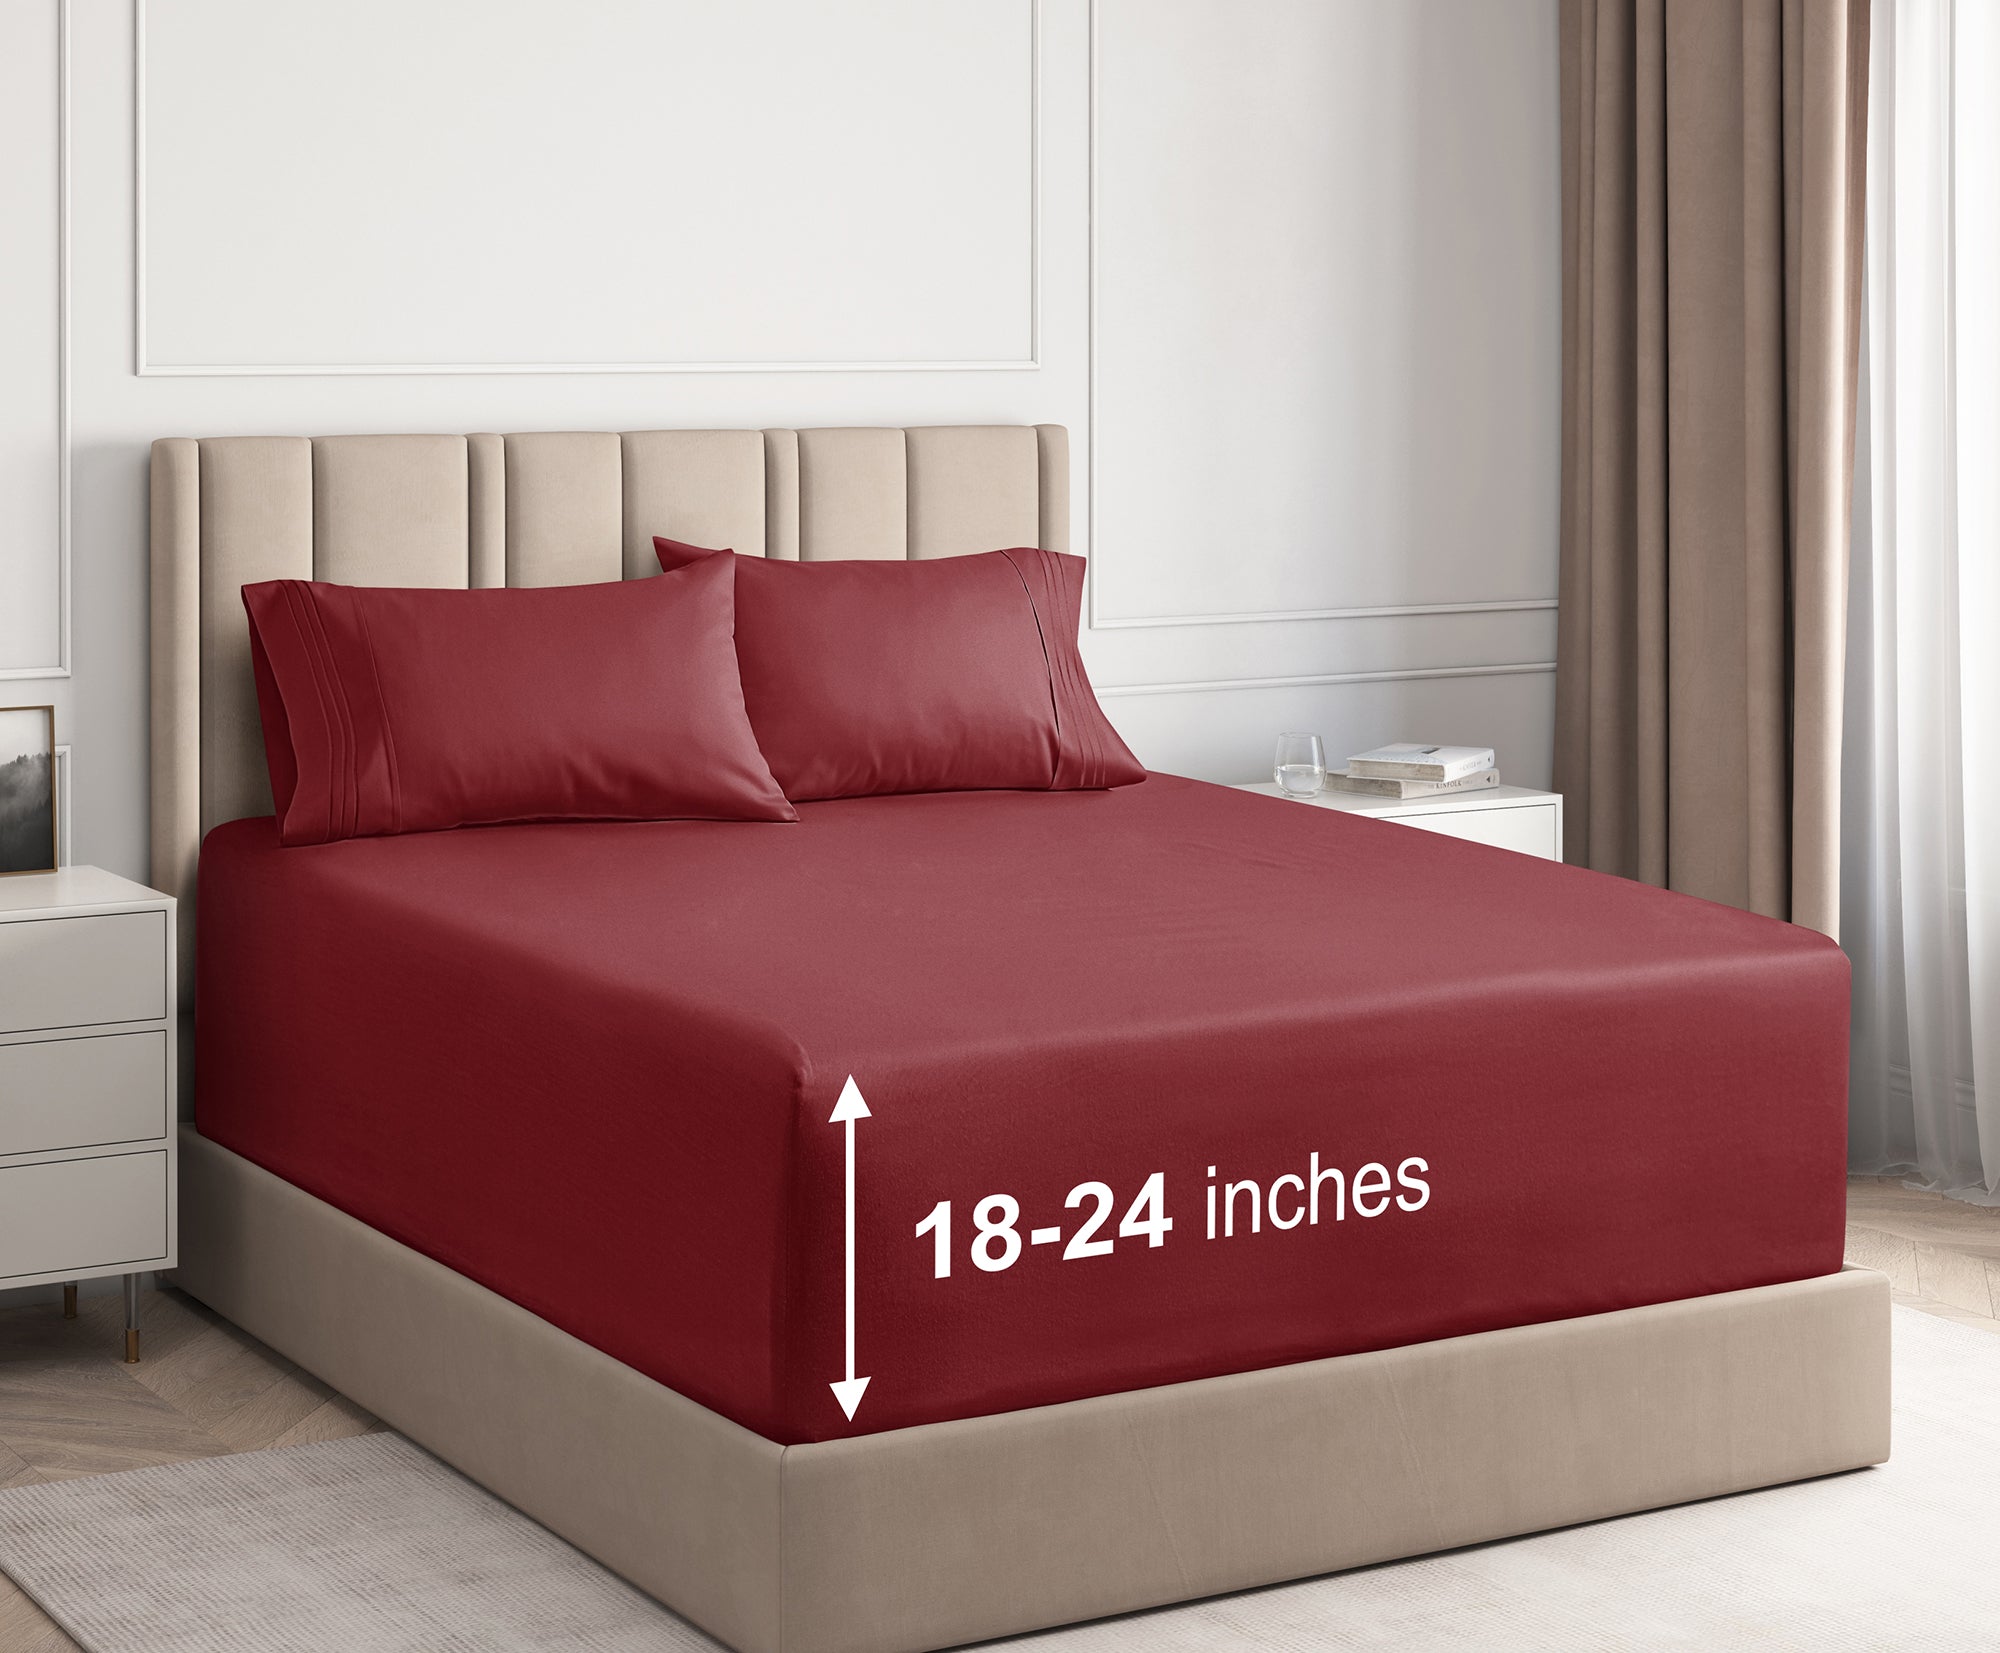 DREAMCARE - Bed Sheets Set - King Size Sheet with Side Pocket - 4pcs Set, 21 Inches, Burgundy, Red